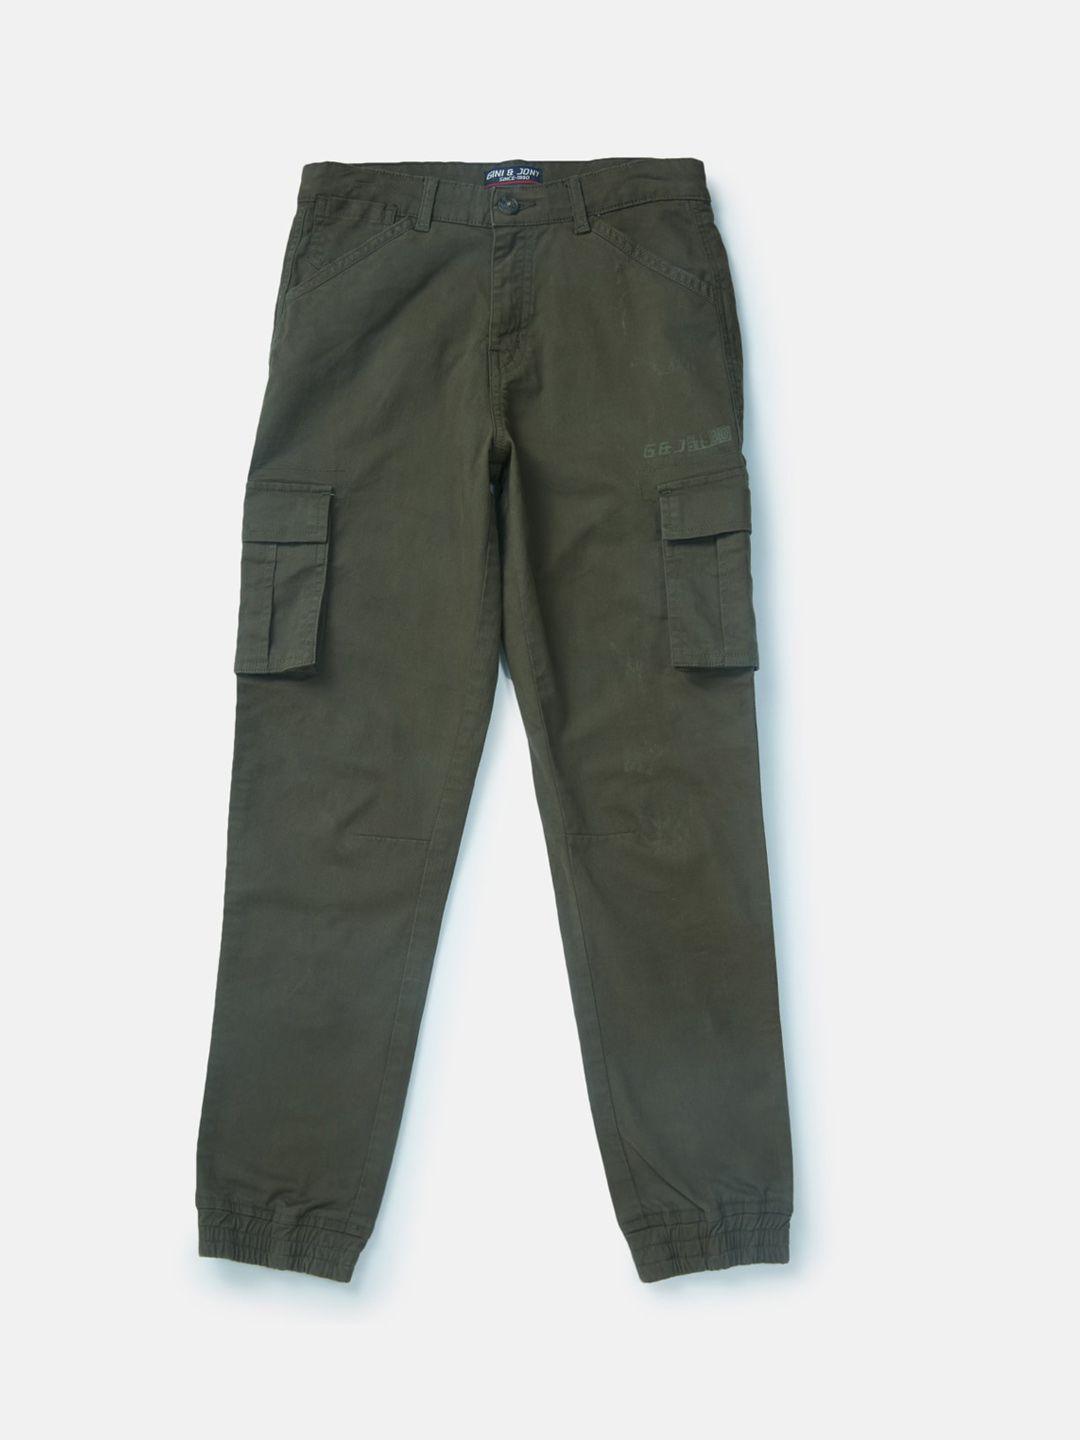 gini and jony boys olive green joggers trousers